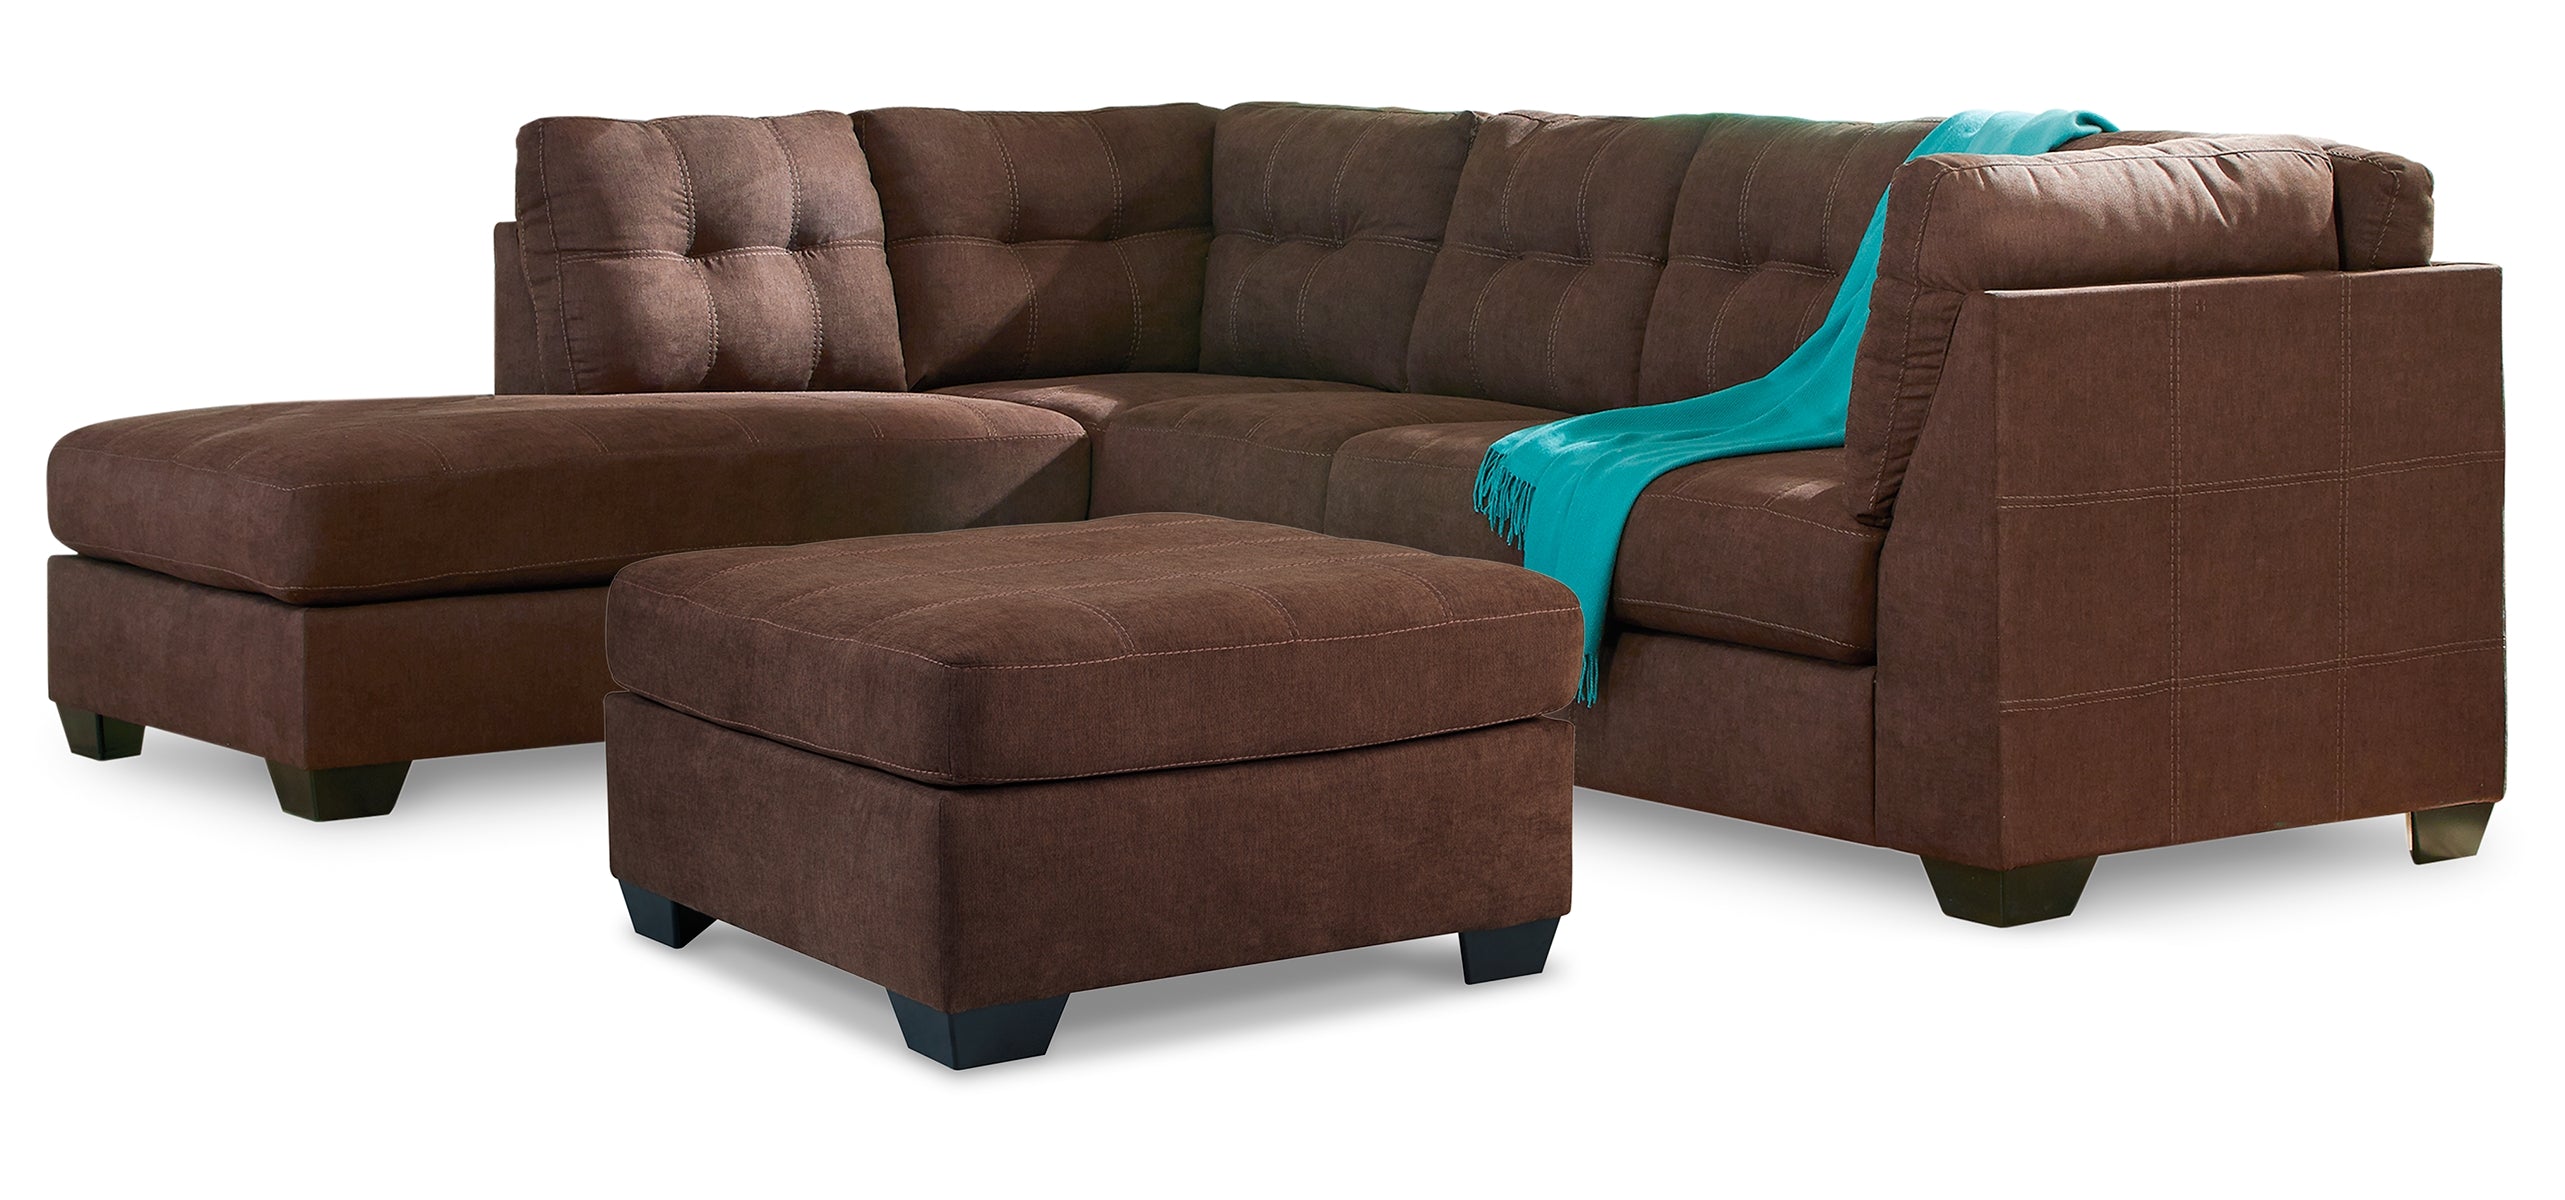 Maier 2-Piece Sectional with Ottoman